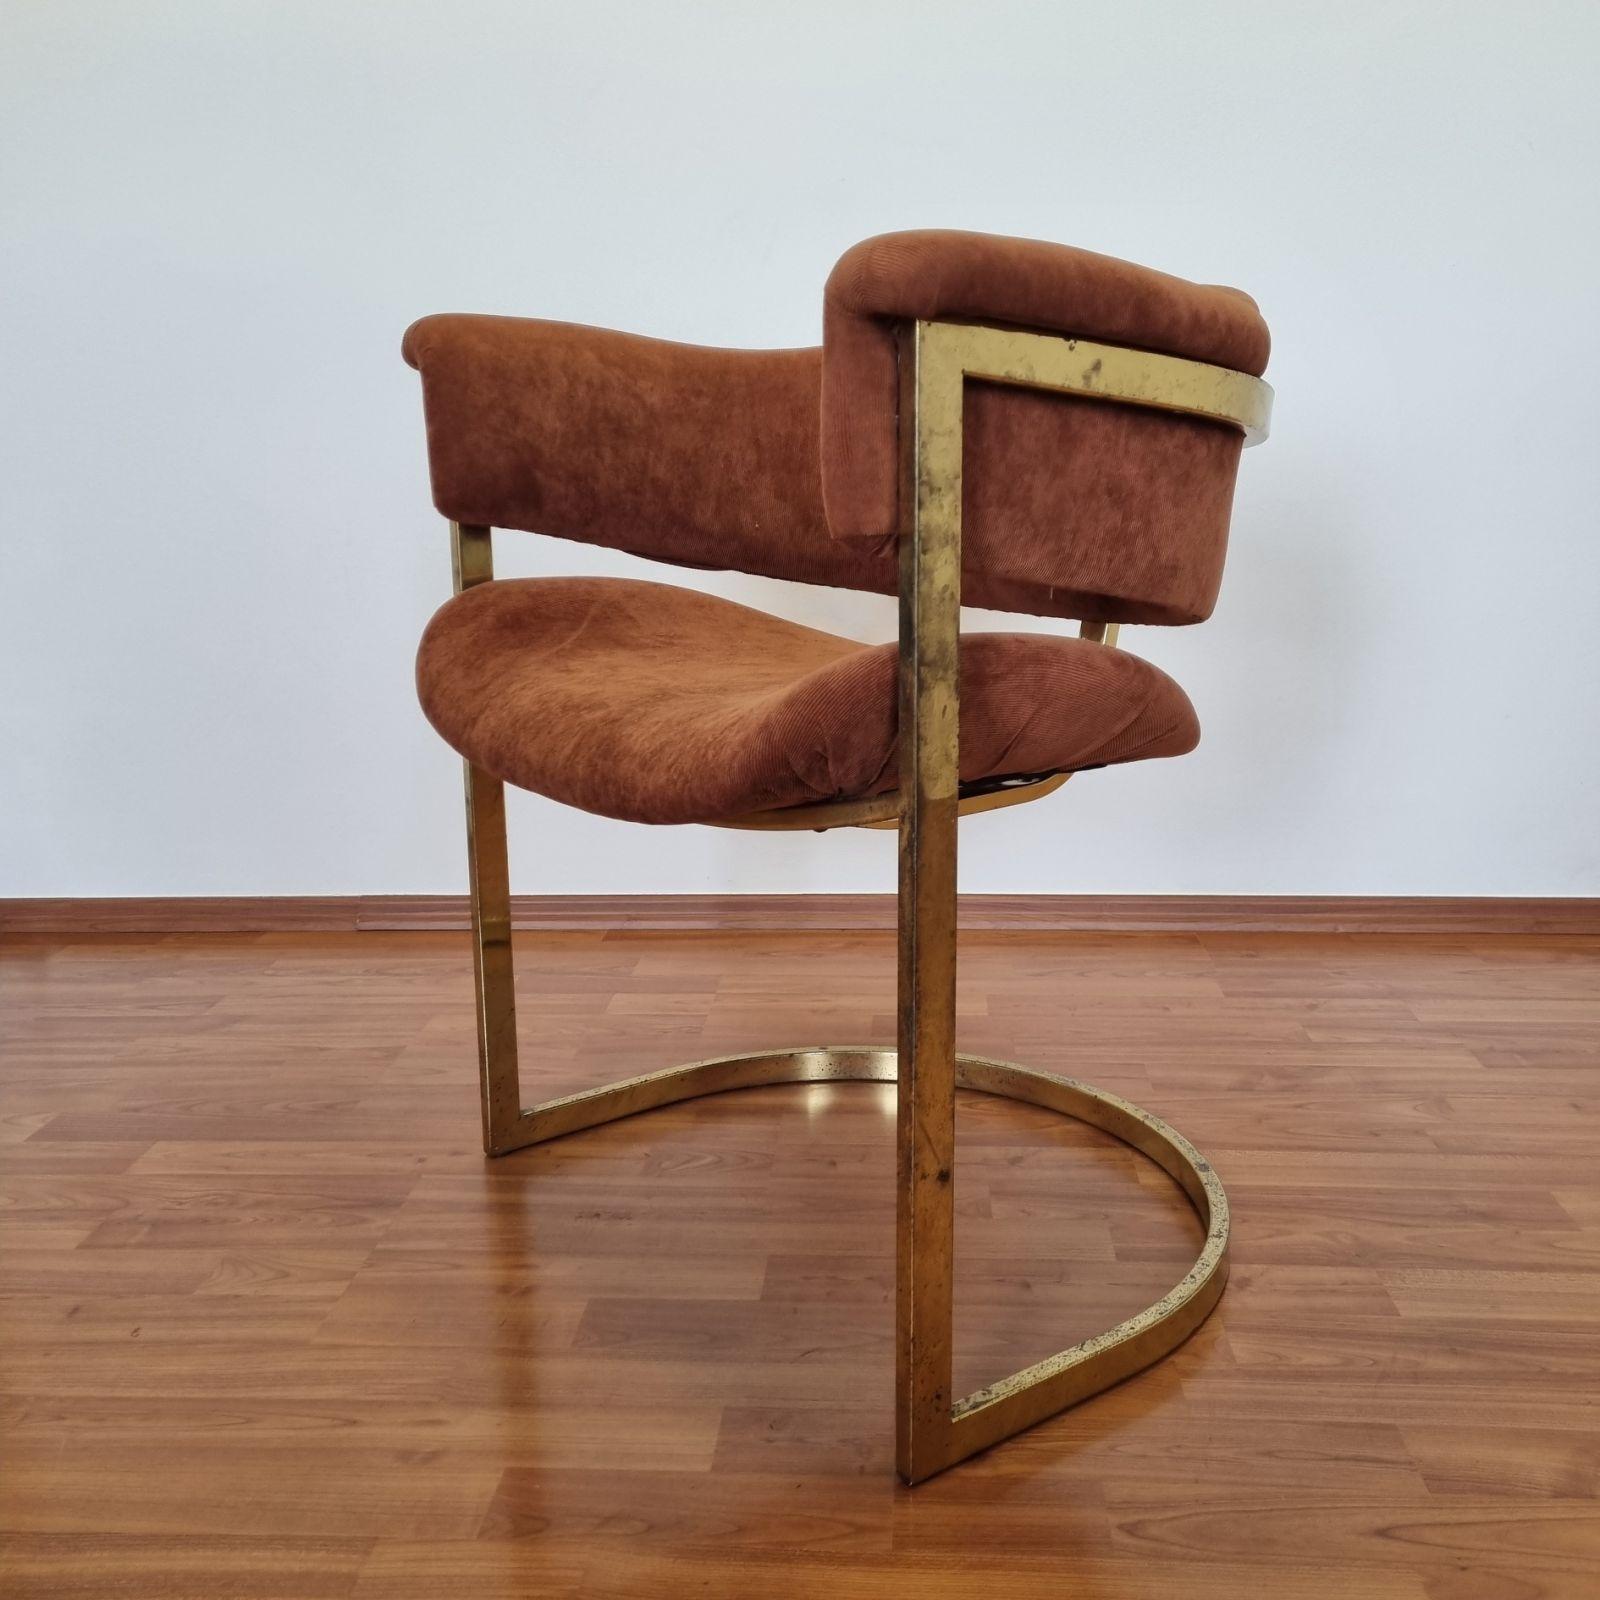 Dining armchair designed by Vittorio Introini and produced by Mario Sabot in the 70s.
Recently reupholstered in brown velvet. It shows signs of age on the metal structure.
Overall in very good condition.